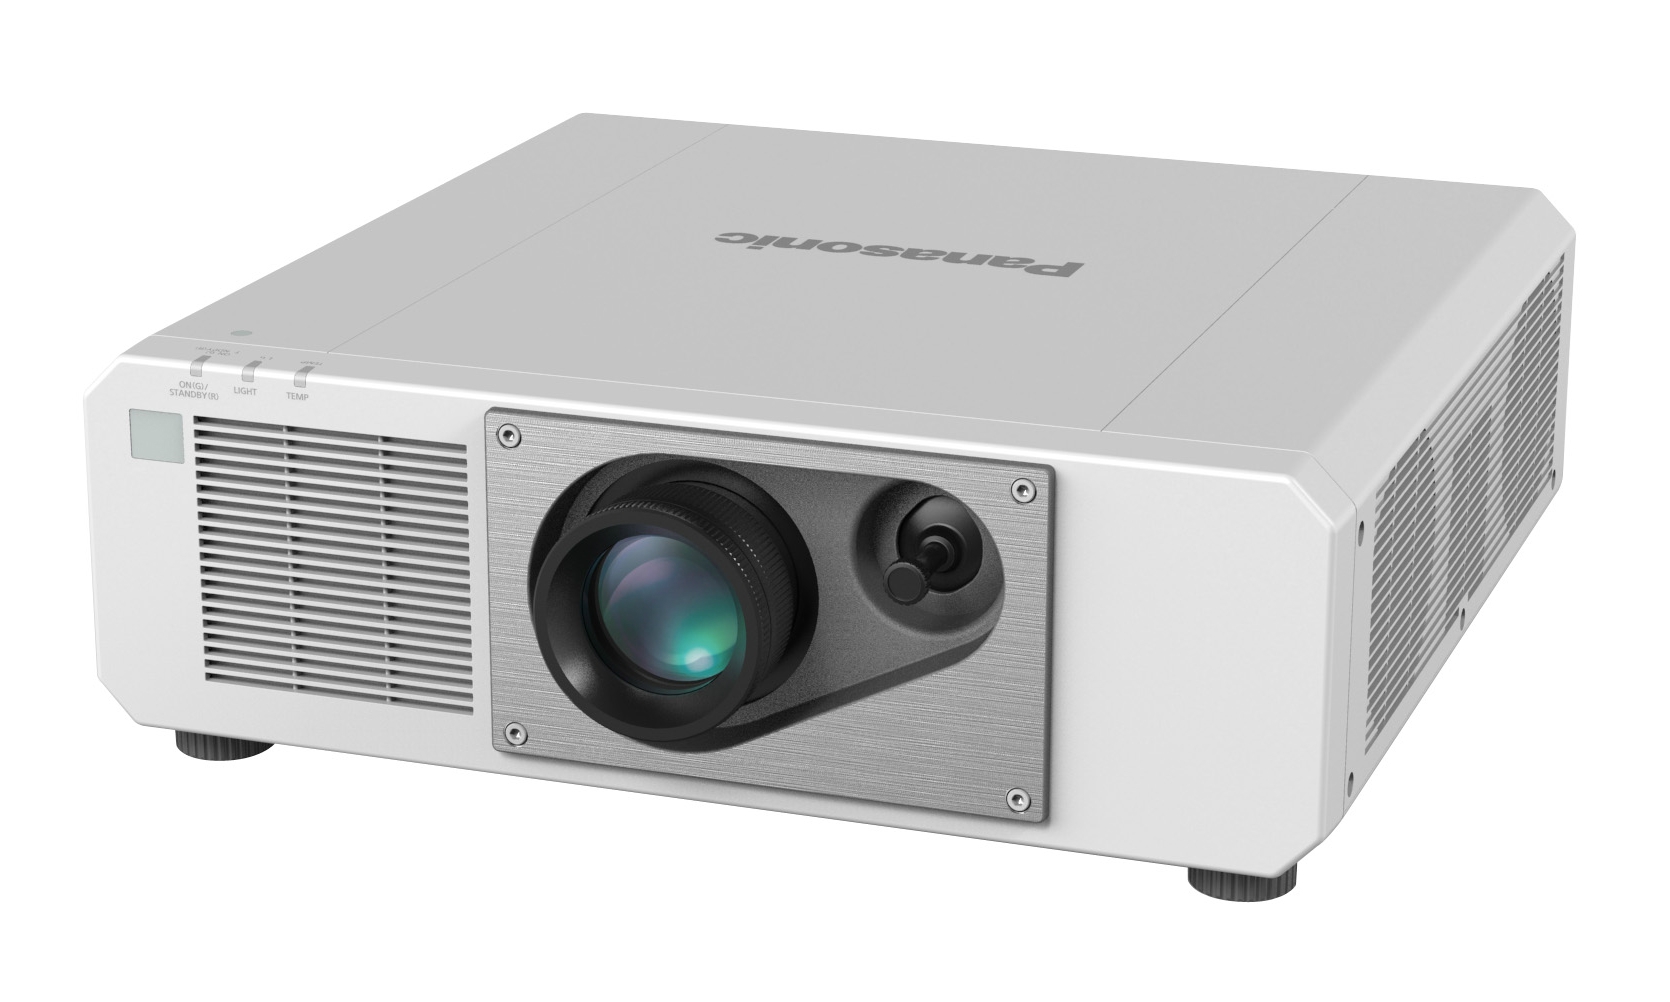 Panasonic launches Endurance laser projector for education